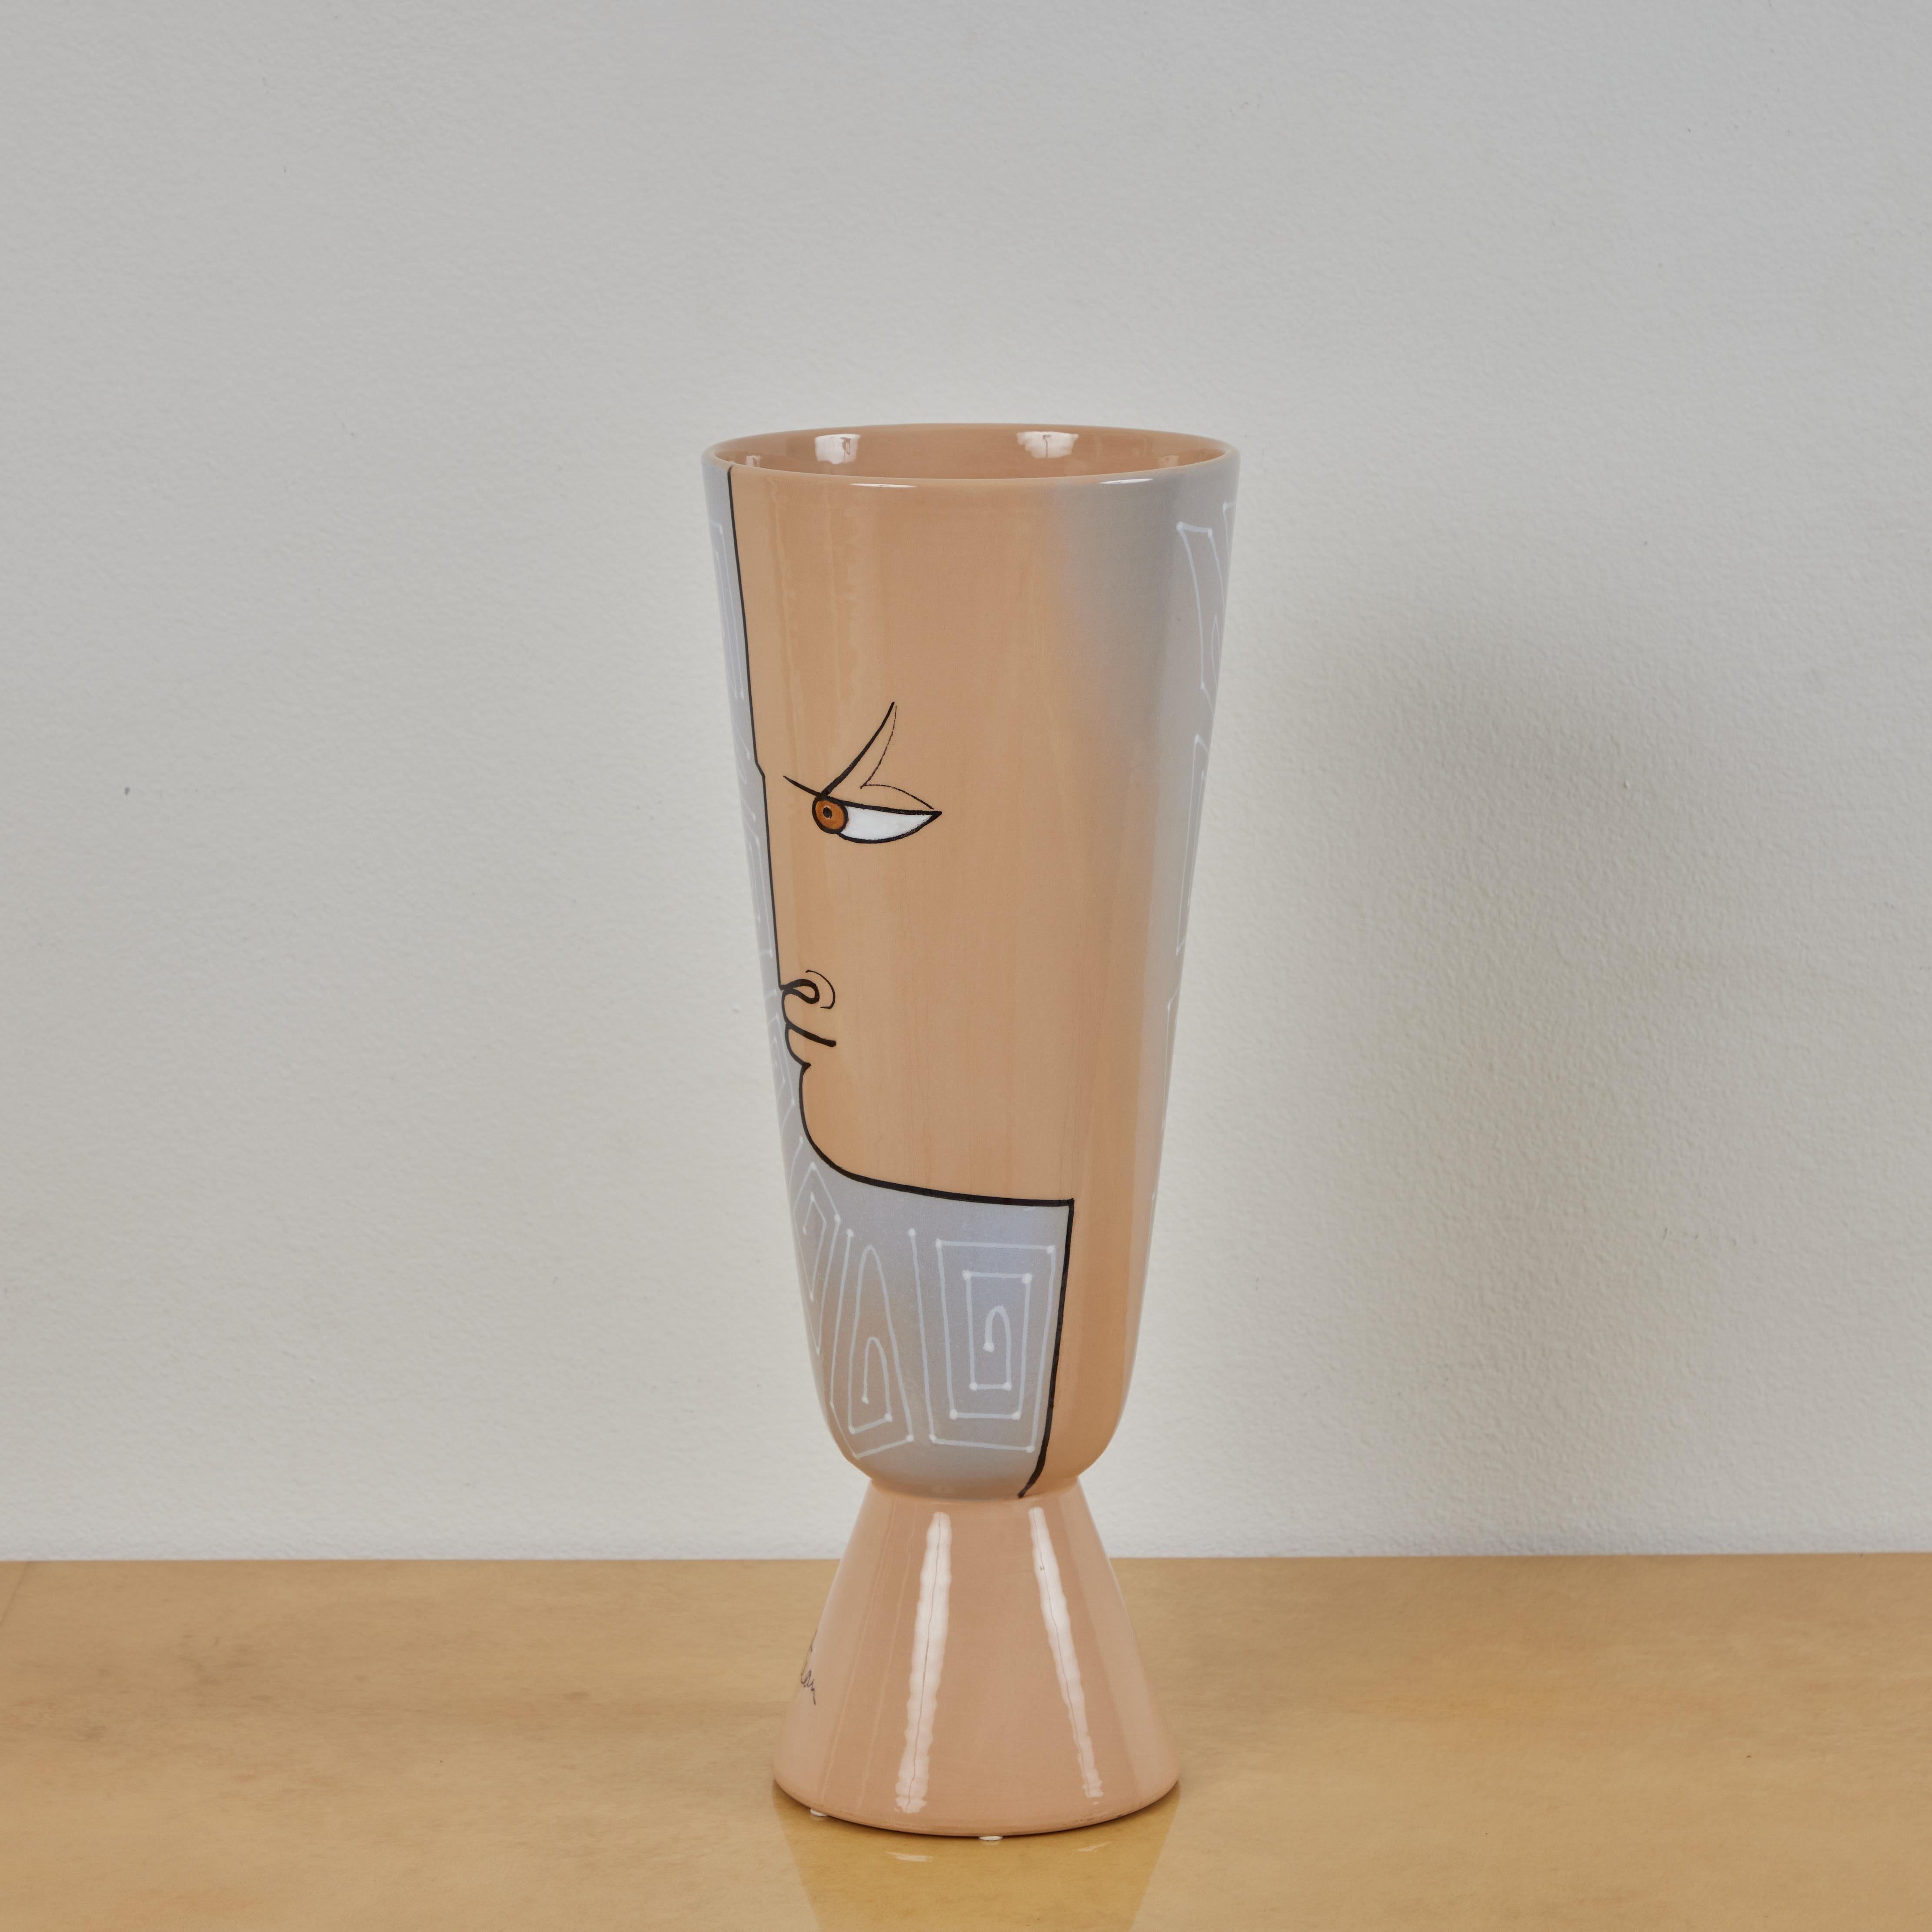 This is a glazed earthenware vase produced by Roche Bobois in the 2010s. The vase utilizes a design Jean Cocteau produced in the early 1960s. It features 2 taupe profiles with geometric details over gray. The taupe and the grey blend nicely. This is